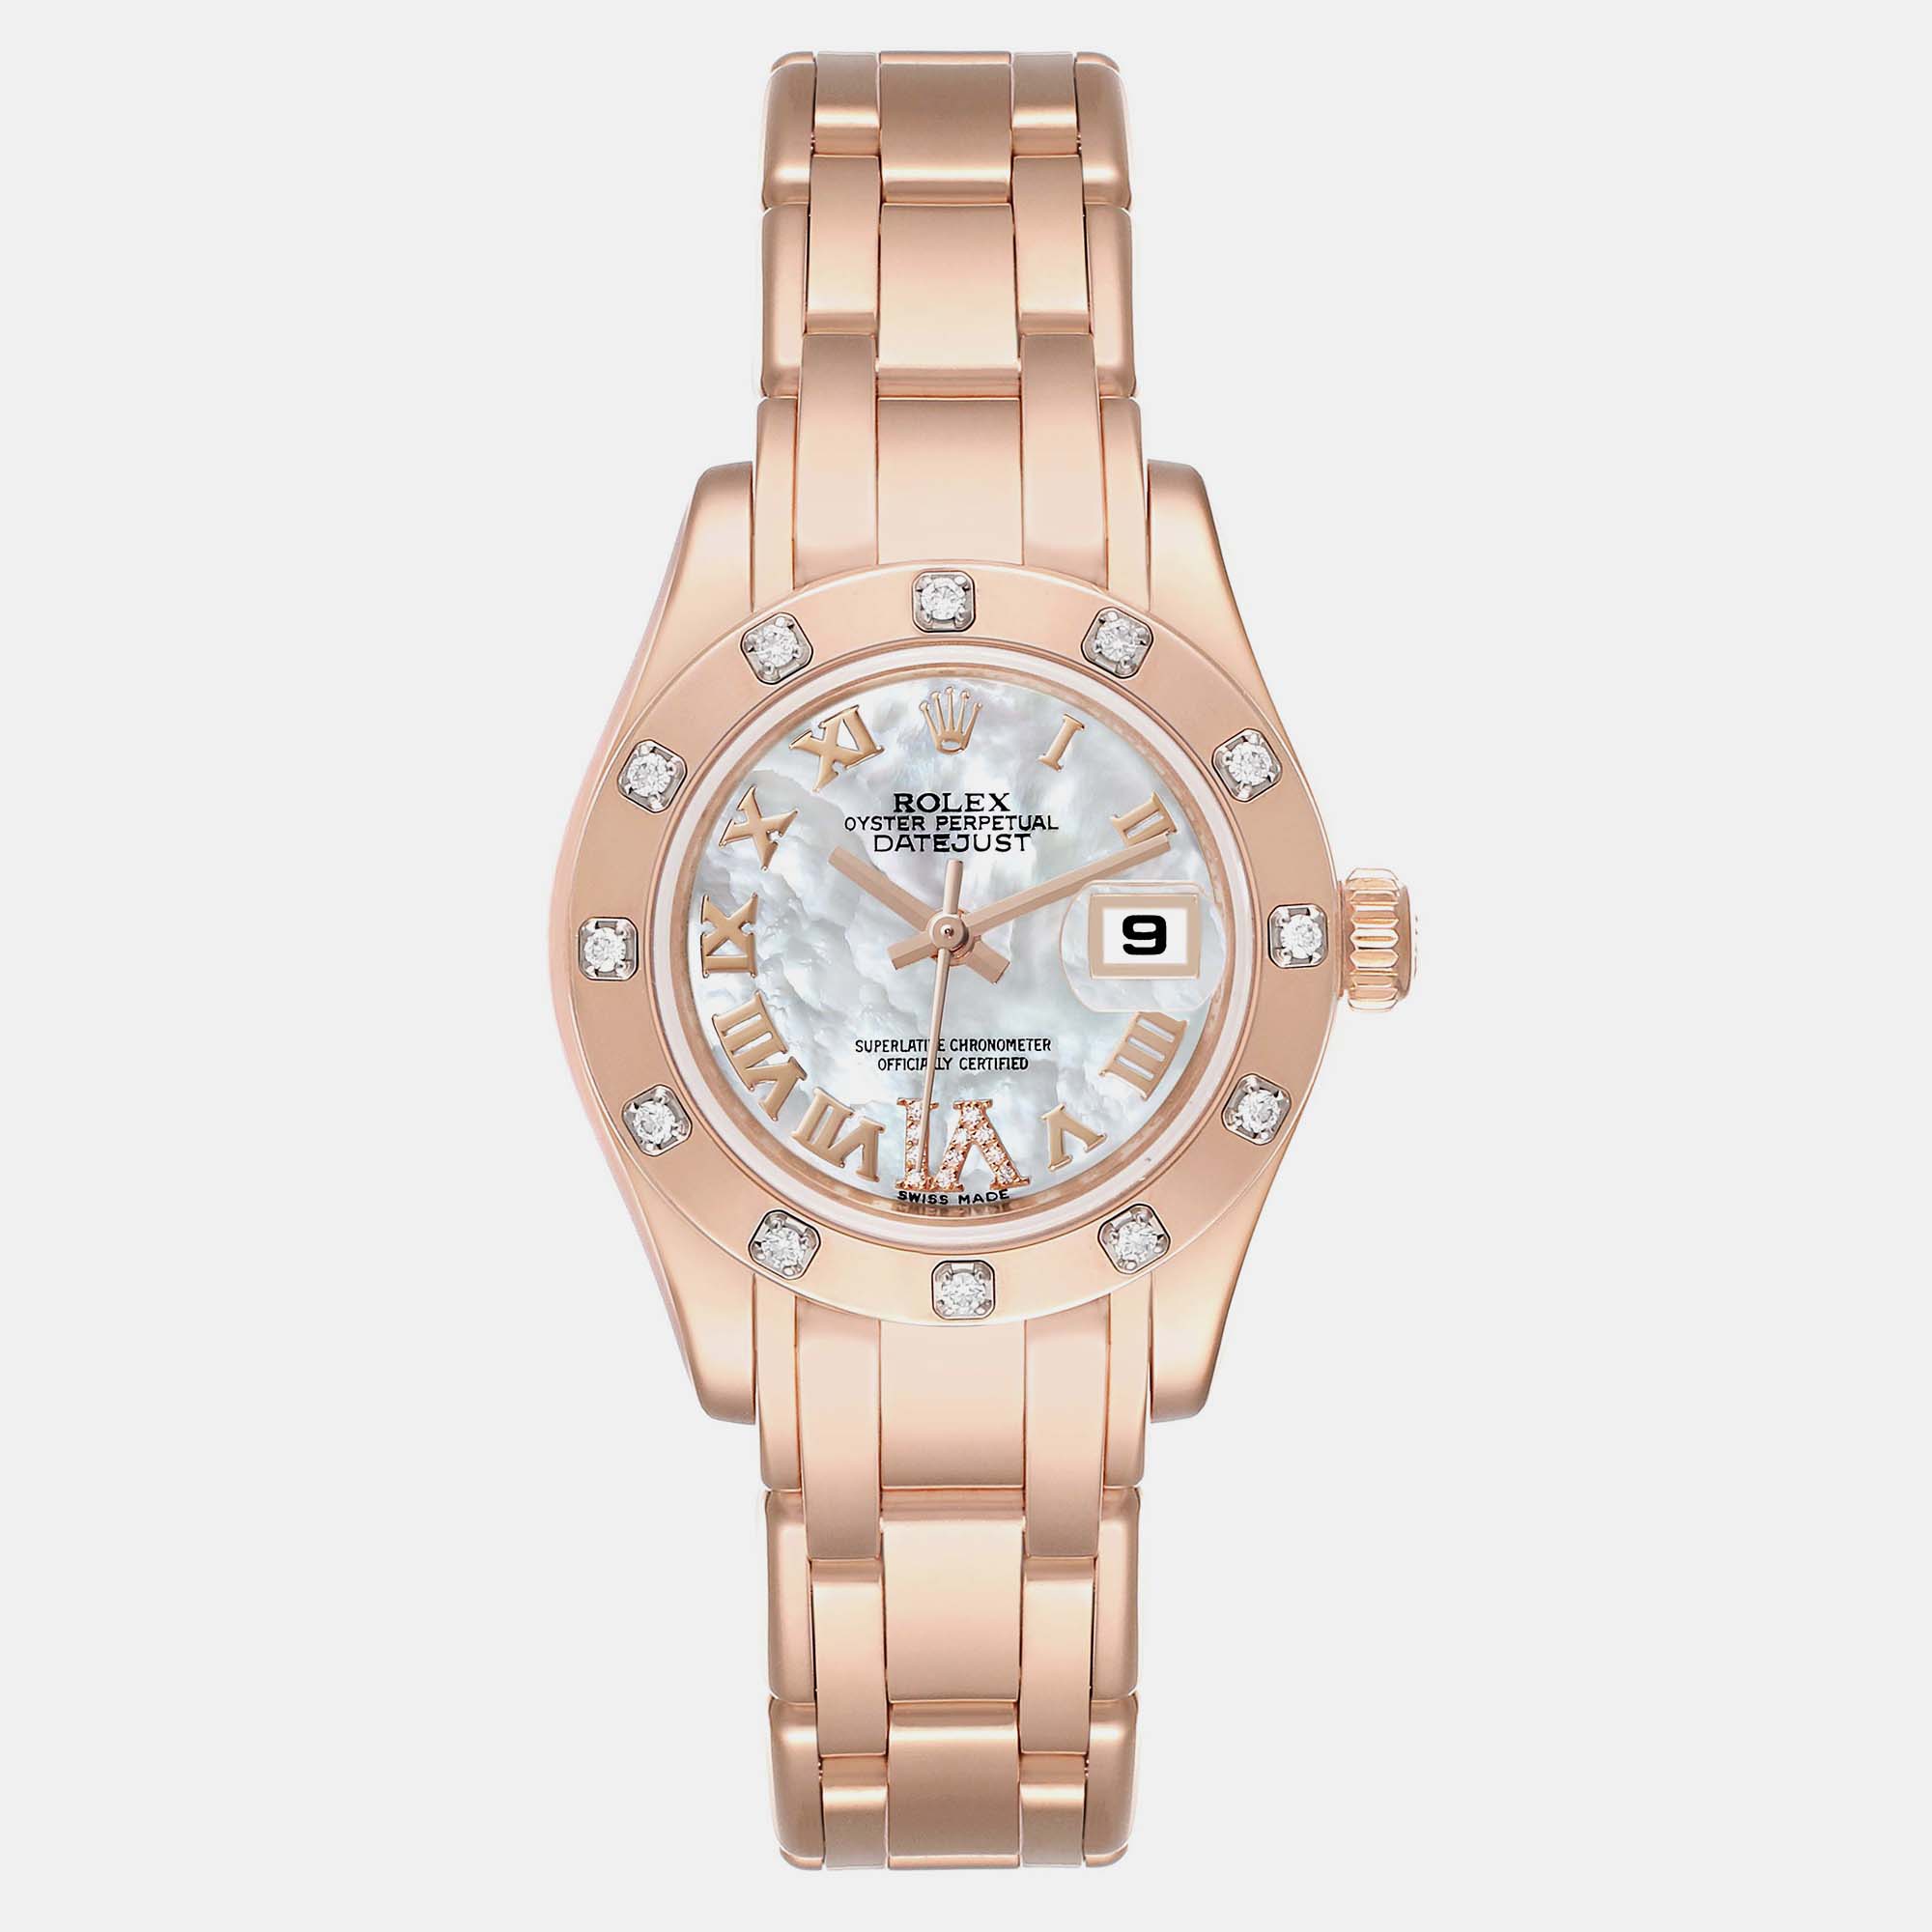 Rolex pearlmaster mother of pearl dial rose gold diamond ladies watch 80315 29 mm